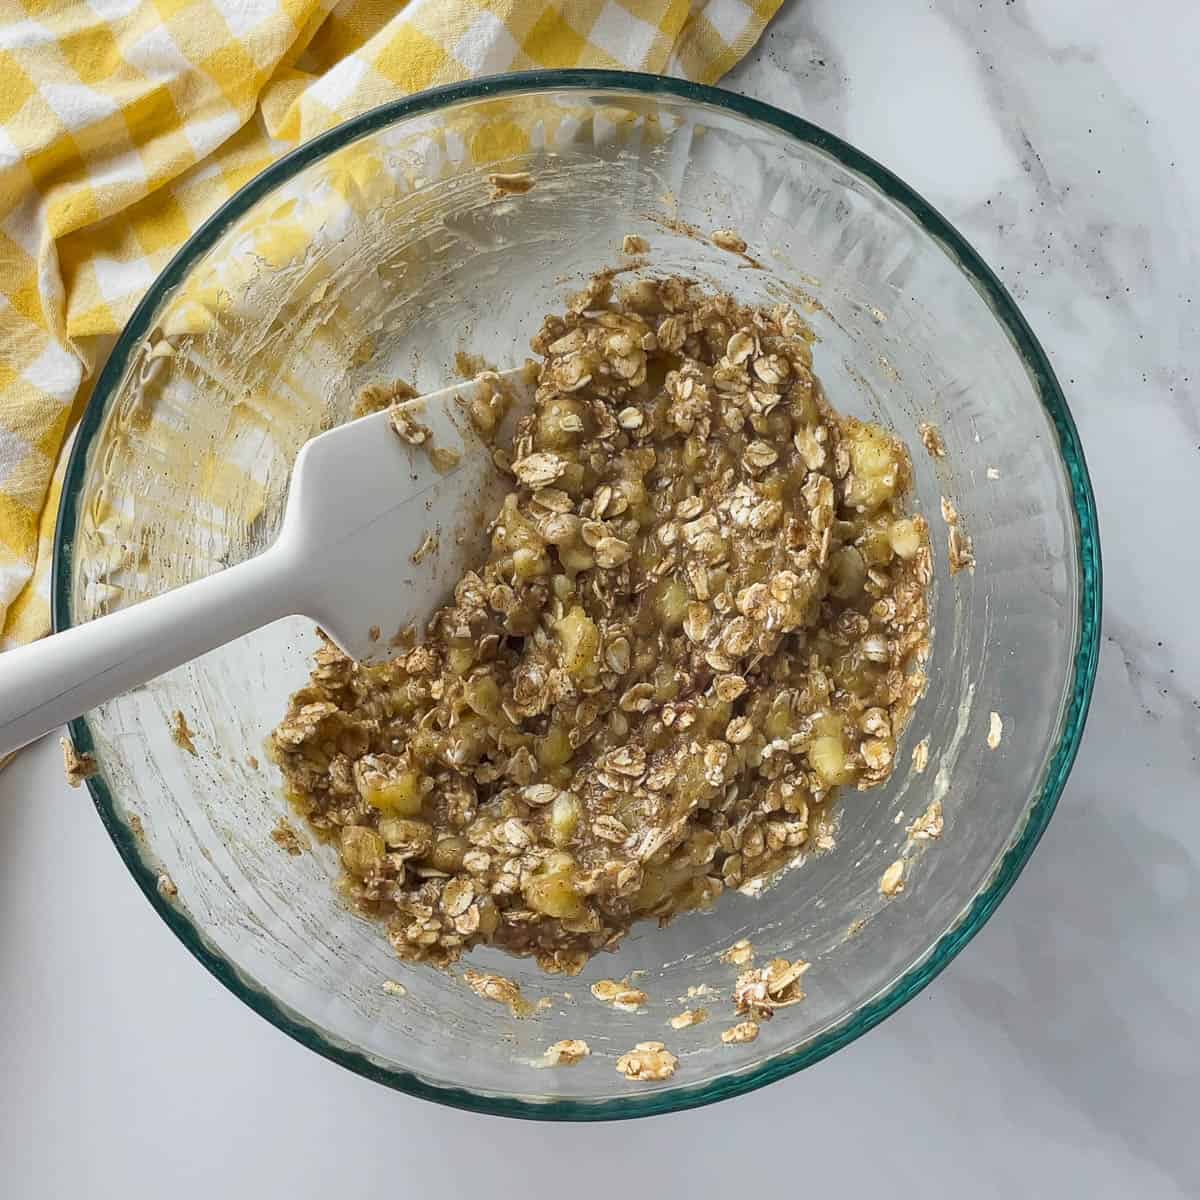 mashed banana, oatmeal, and cinnamon combined in mixing bowl